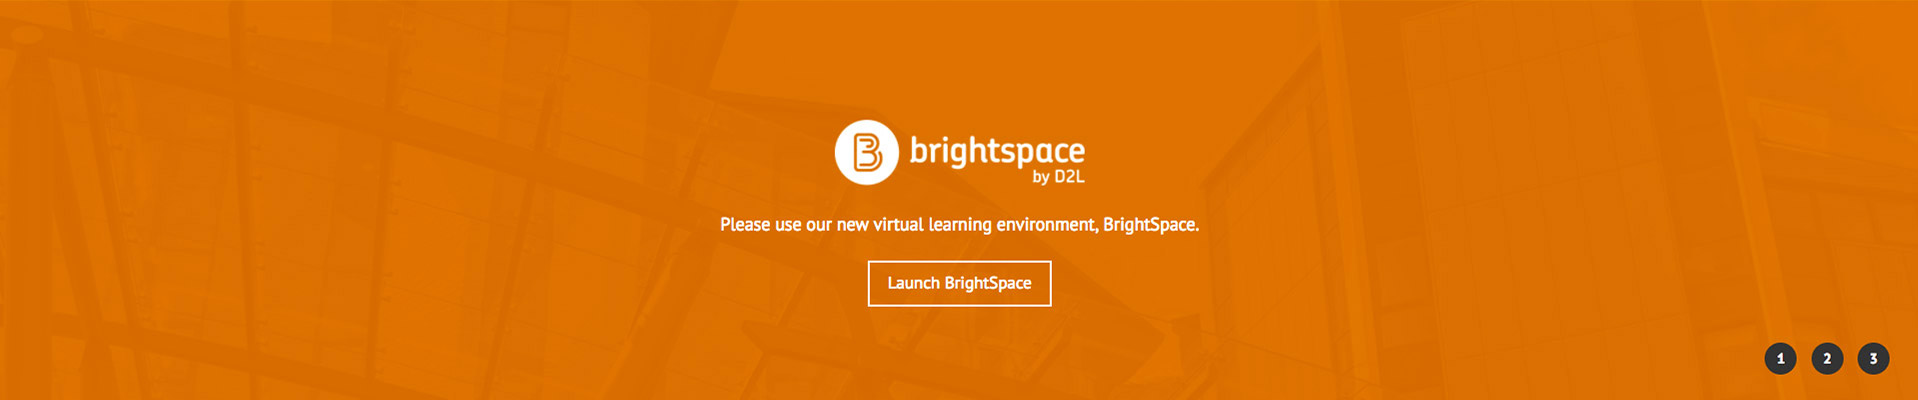 Please login to Brightspace